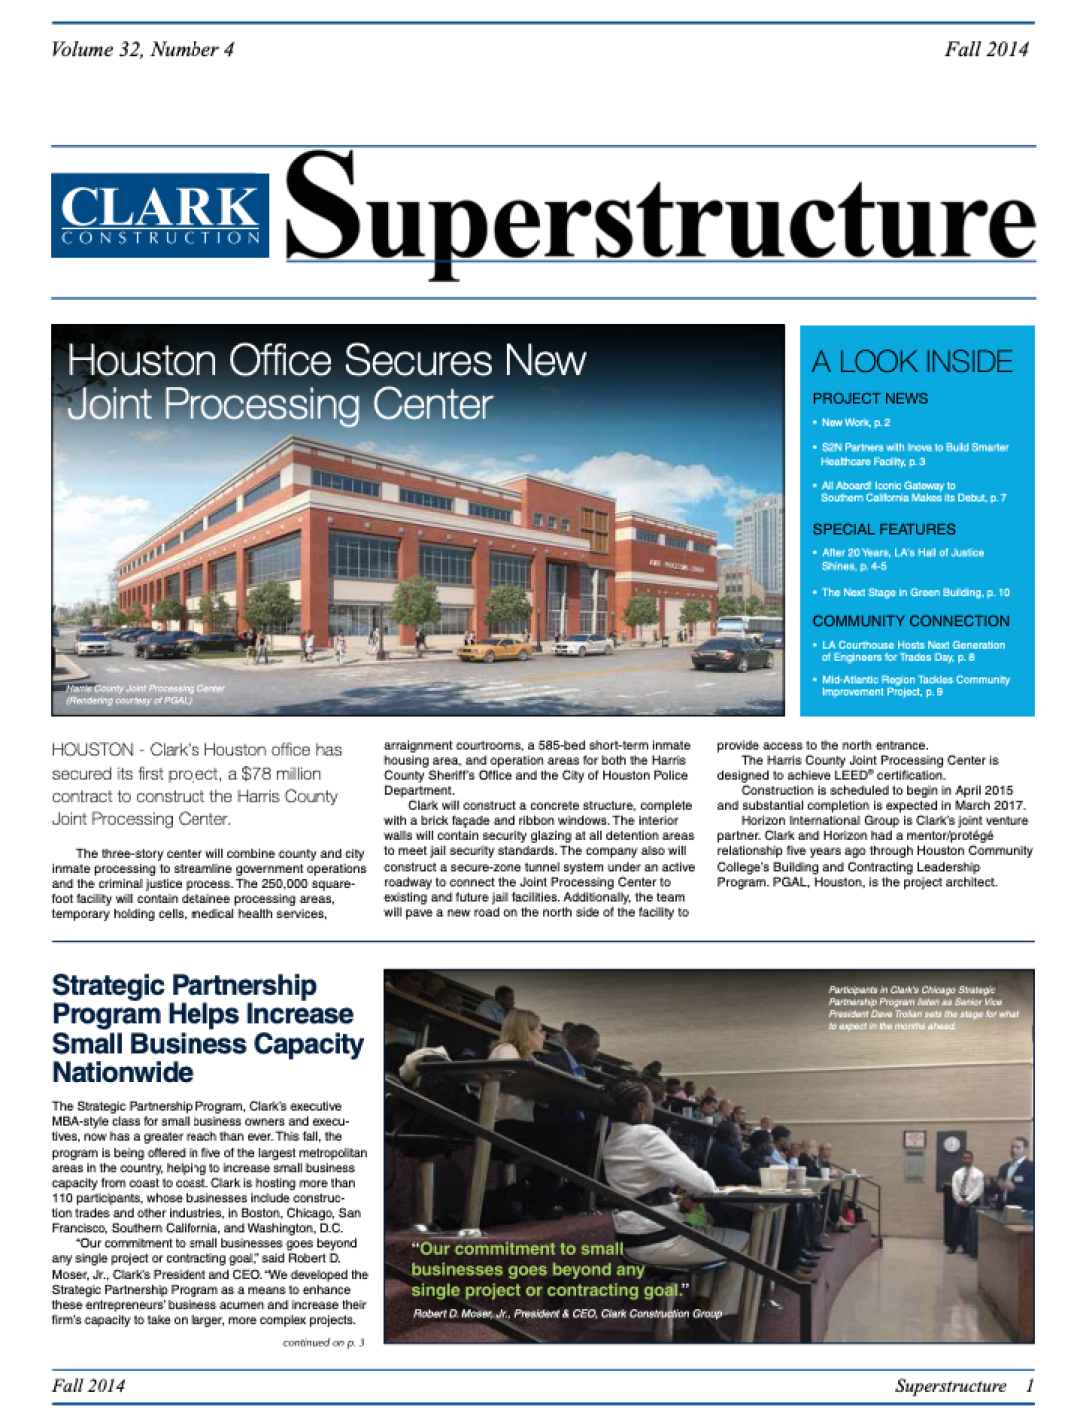 Superstructure Fall 2014